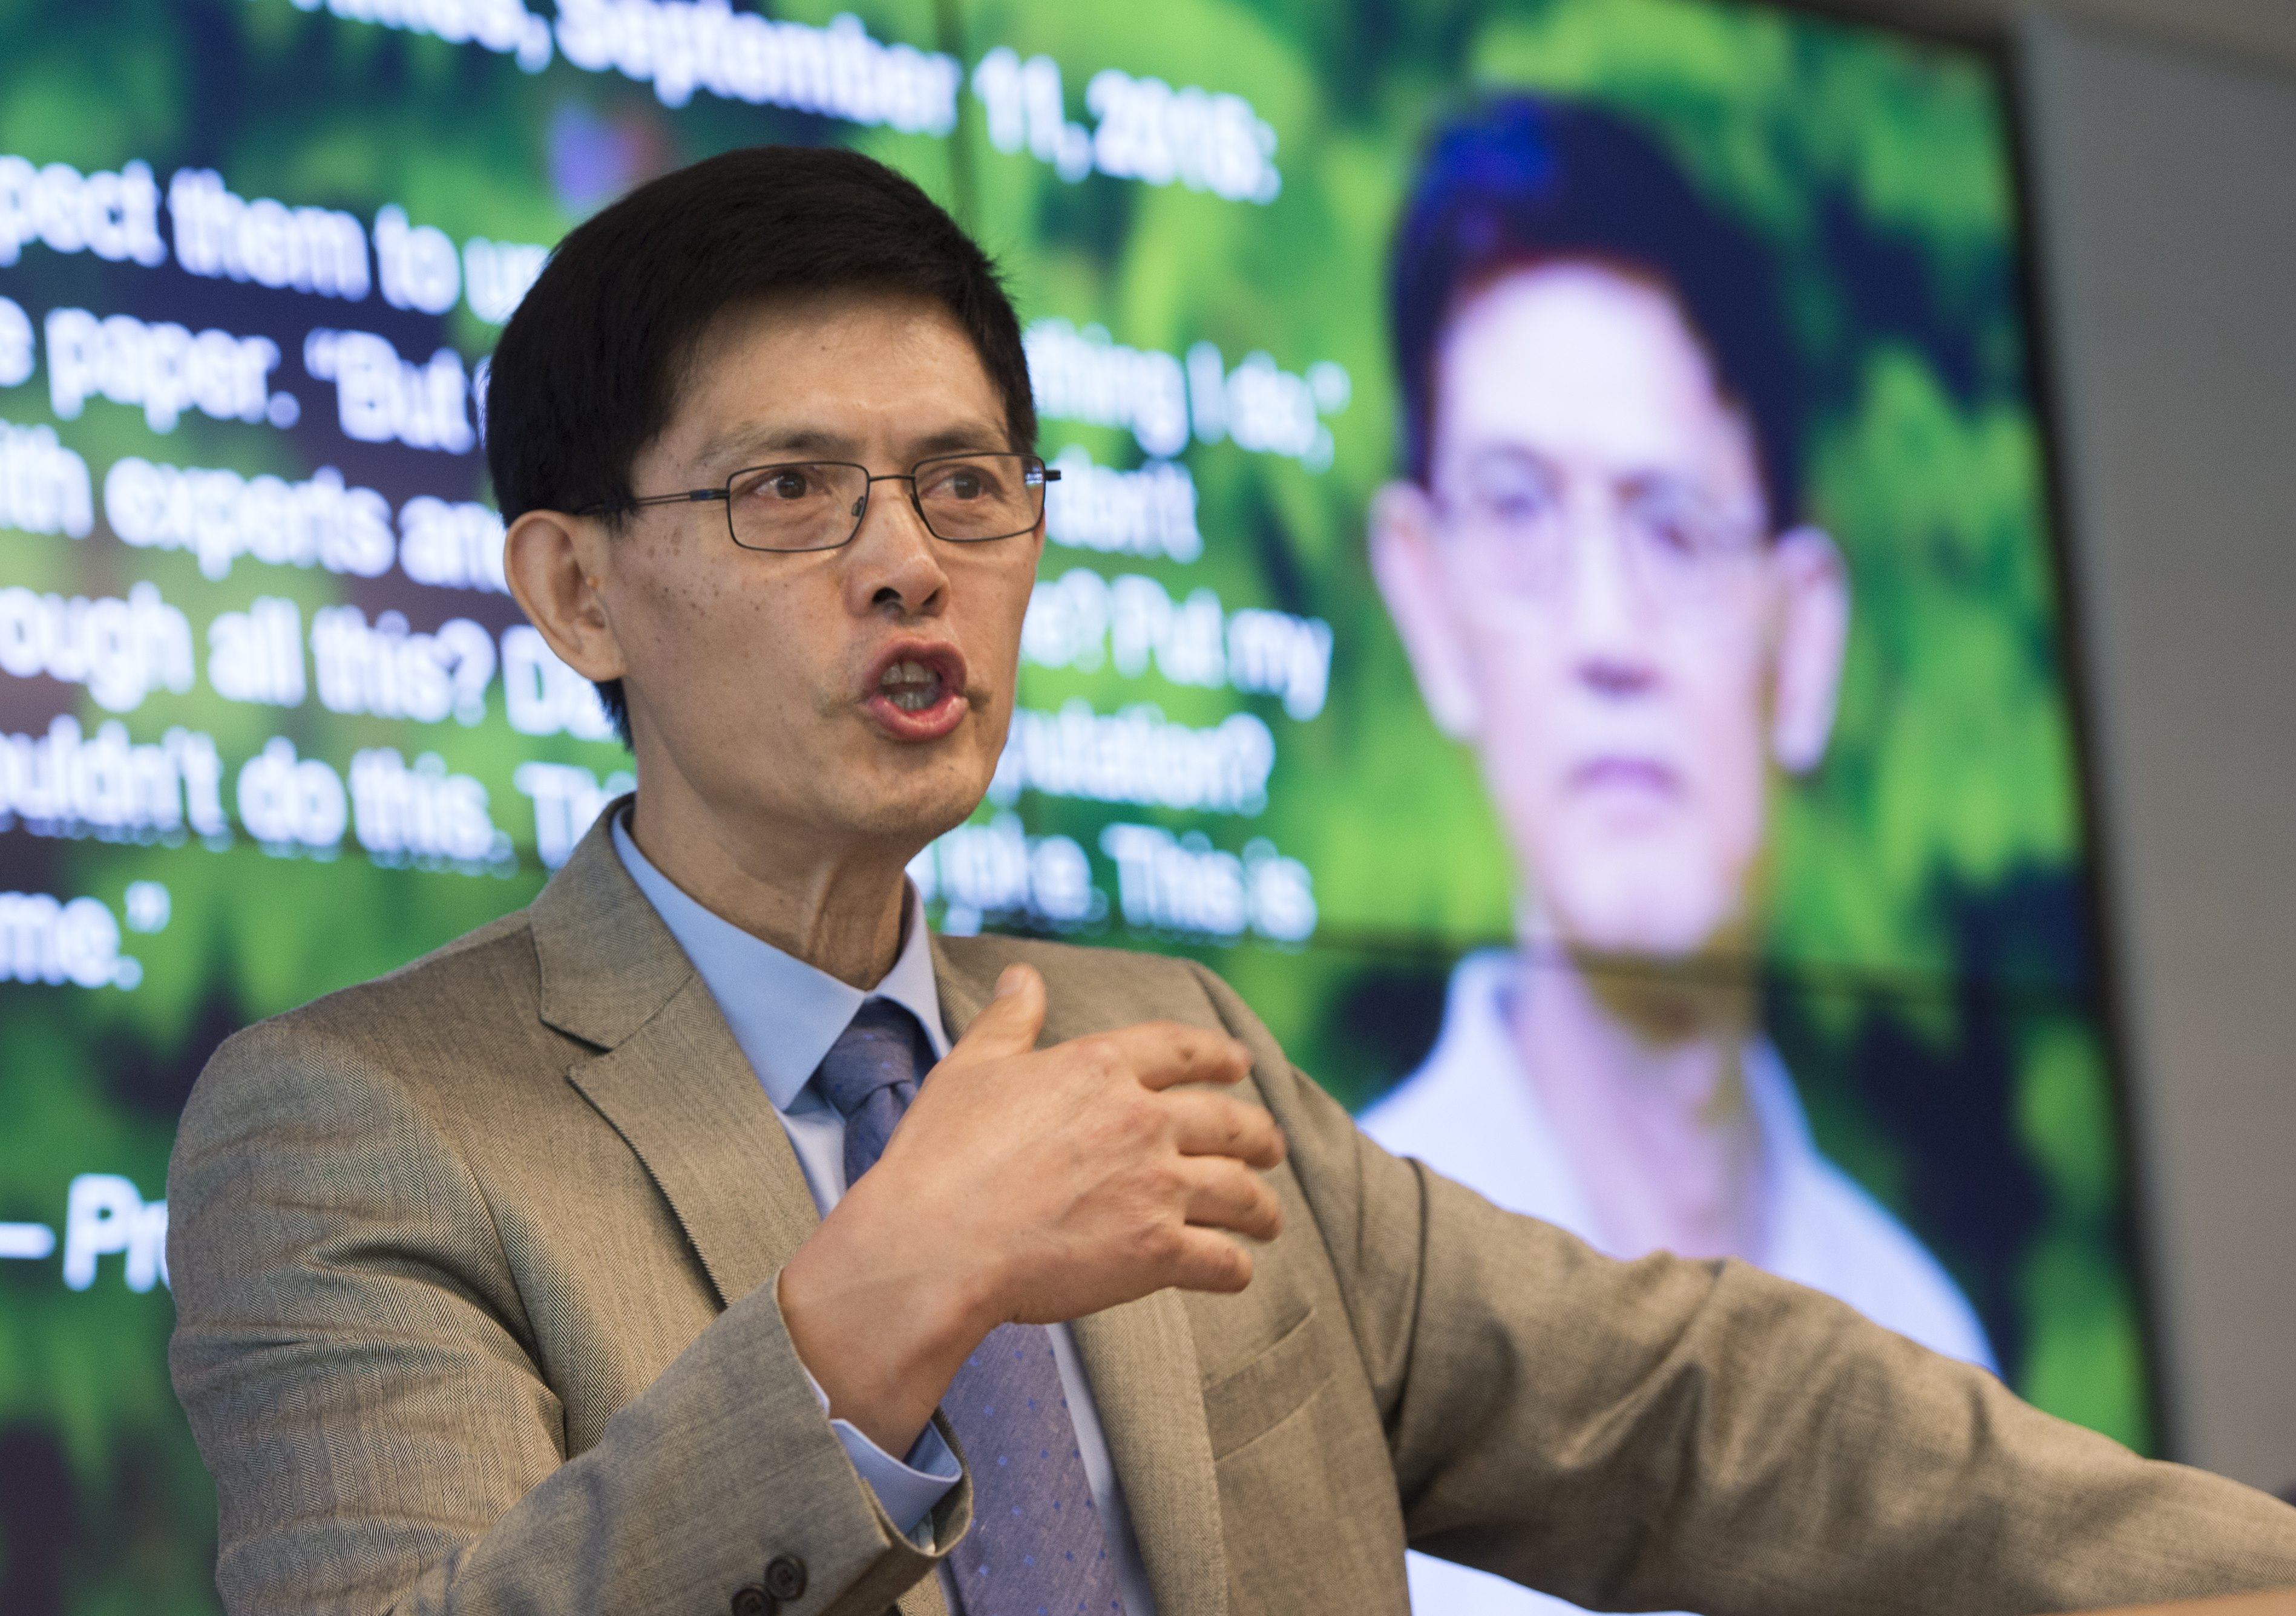 Xi Xiaoxing, chair of the Physics Department at Temple University, speaks about the dropped spying charges during a press conference in Washington in September 2015. Photo: AFP